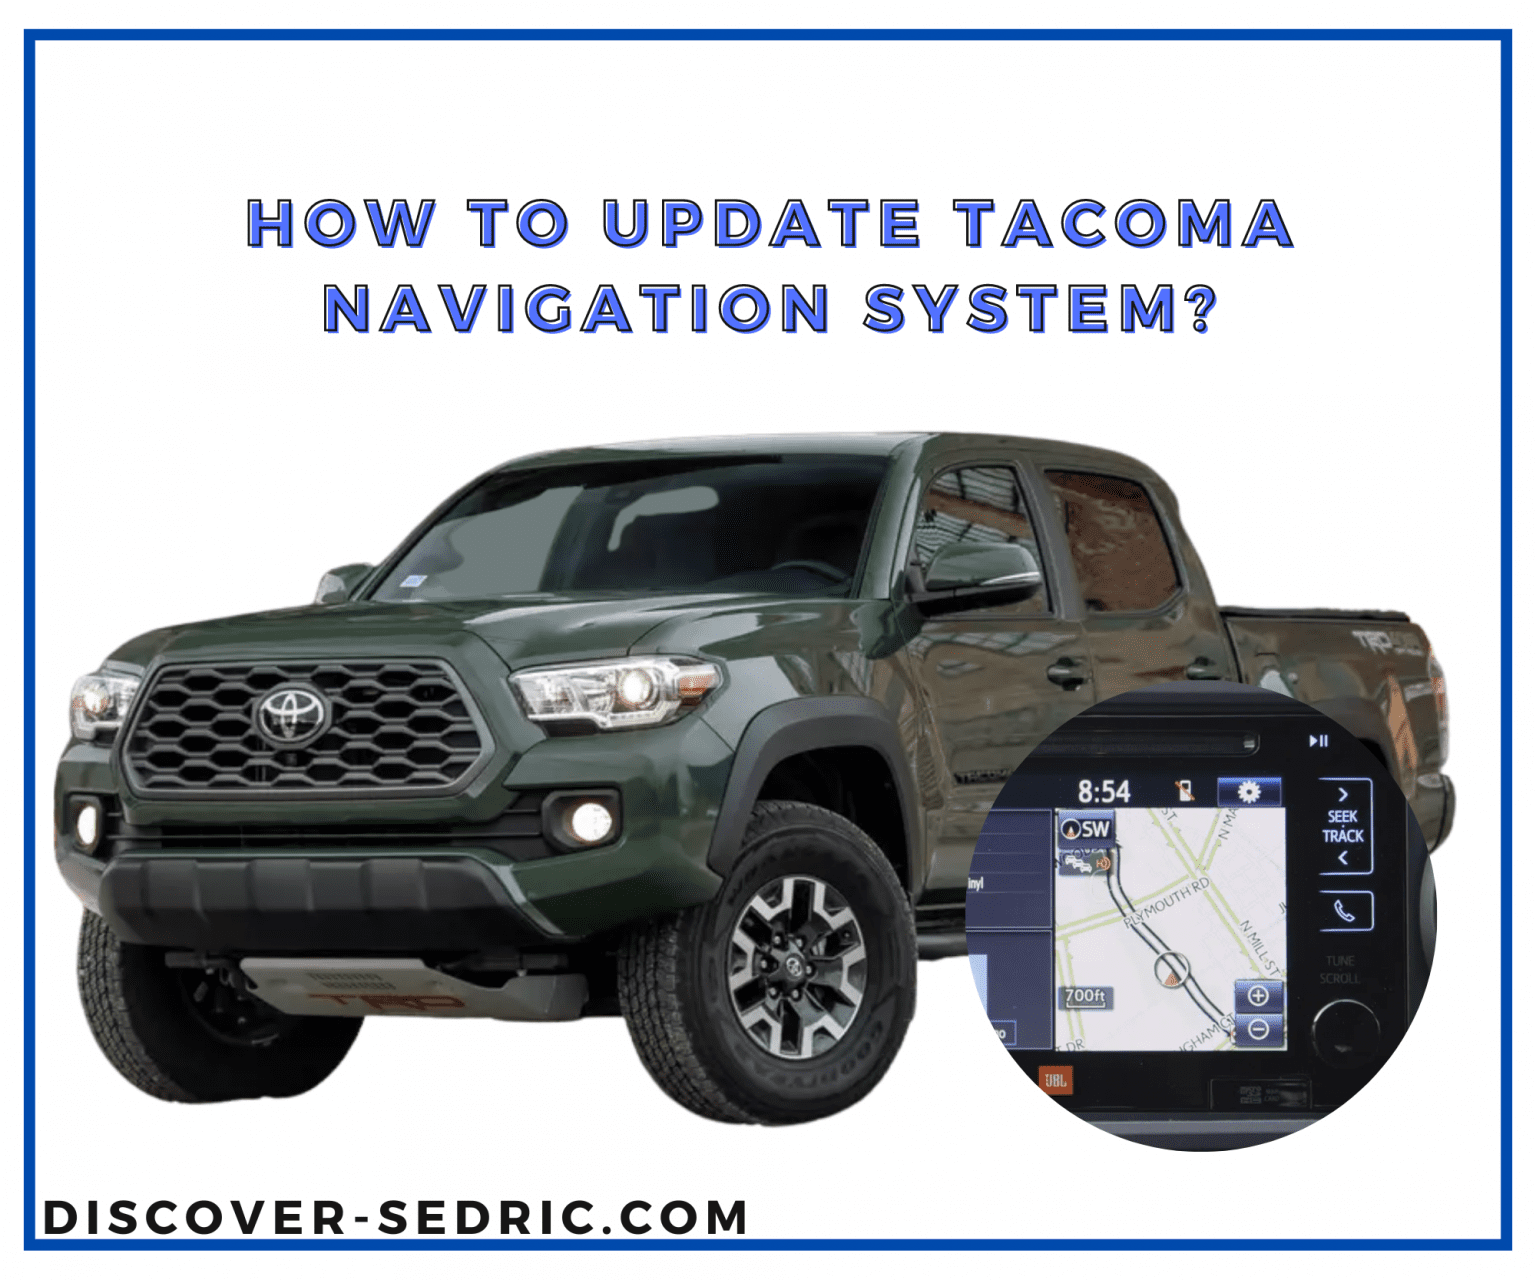 How To Update Navigation System? [Answered]